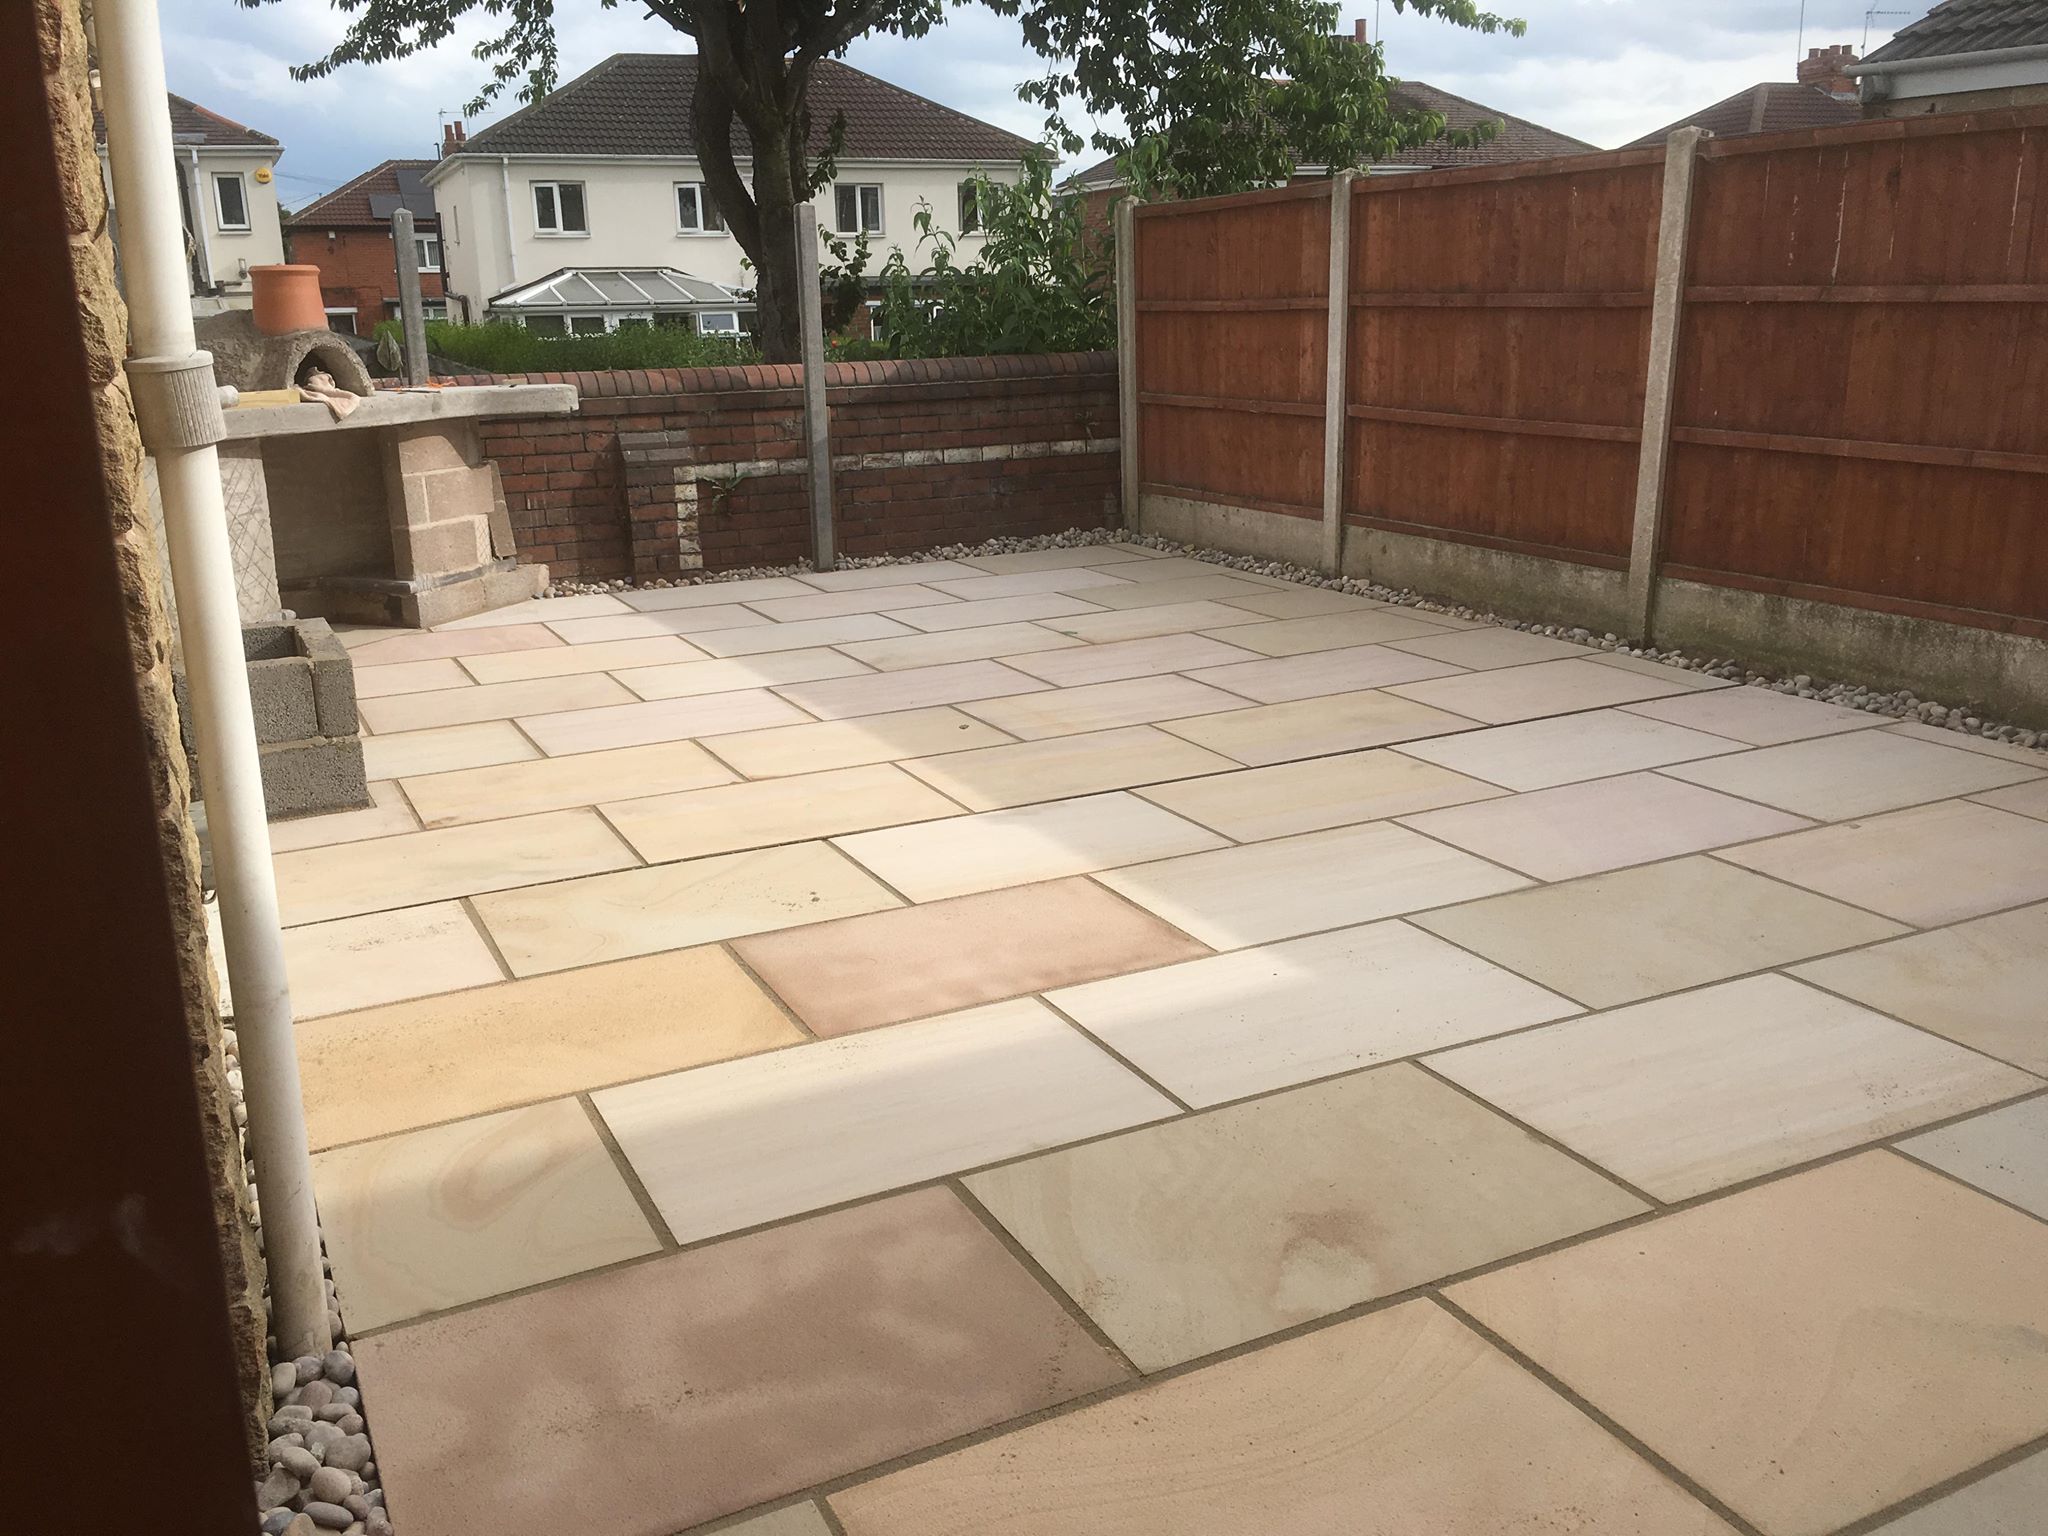 Rippon Buff Indian Sandstone Paving Slabs - Sawn & Honed - 900x600 - 20mm - Smooth Paving - Universal Paving UK Limited Premier Supplier